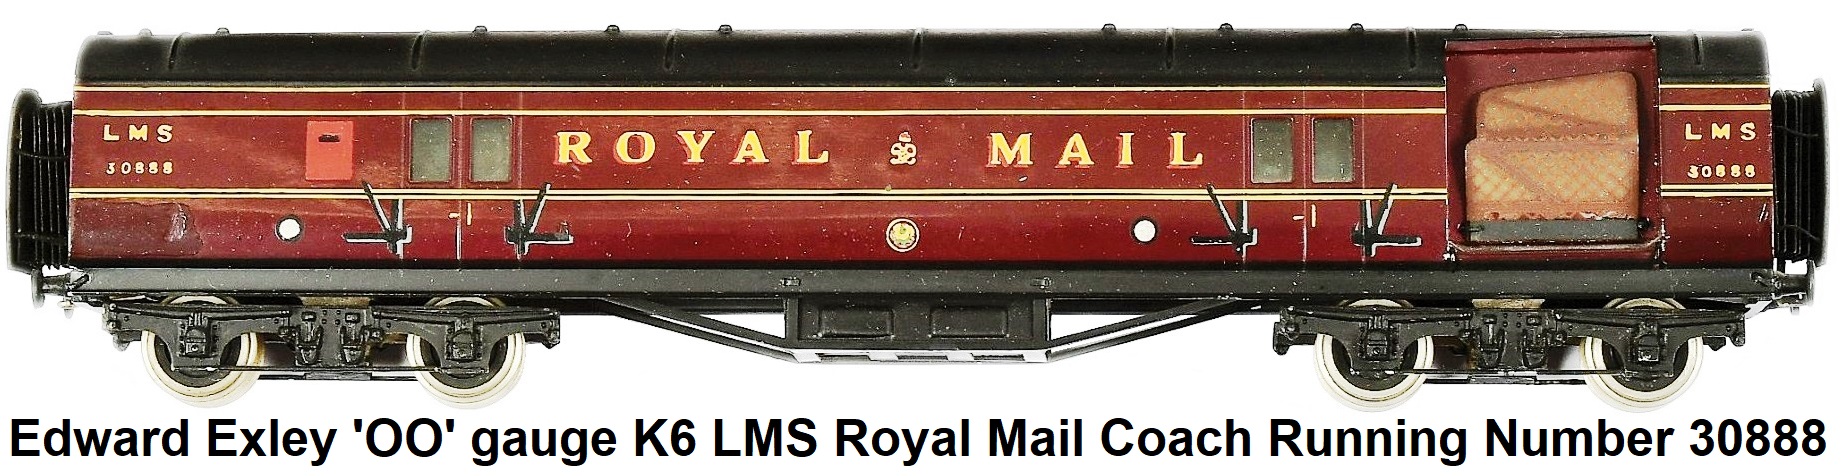 Exley 'OO' gauge K6 LMS Royal Mail Coach Running Number 30888